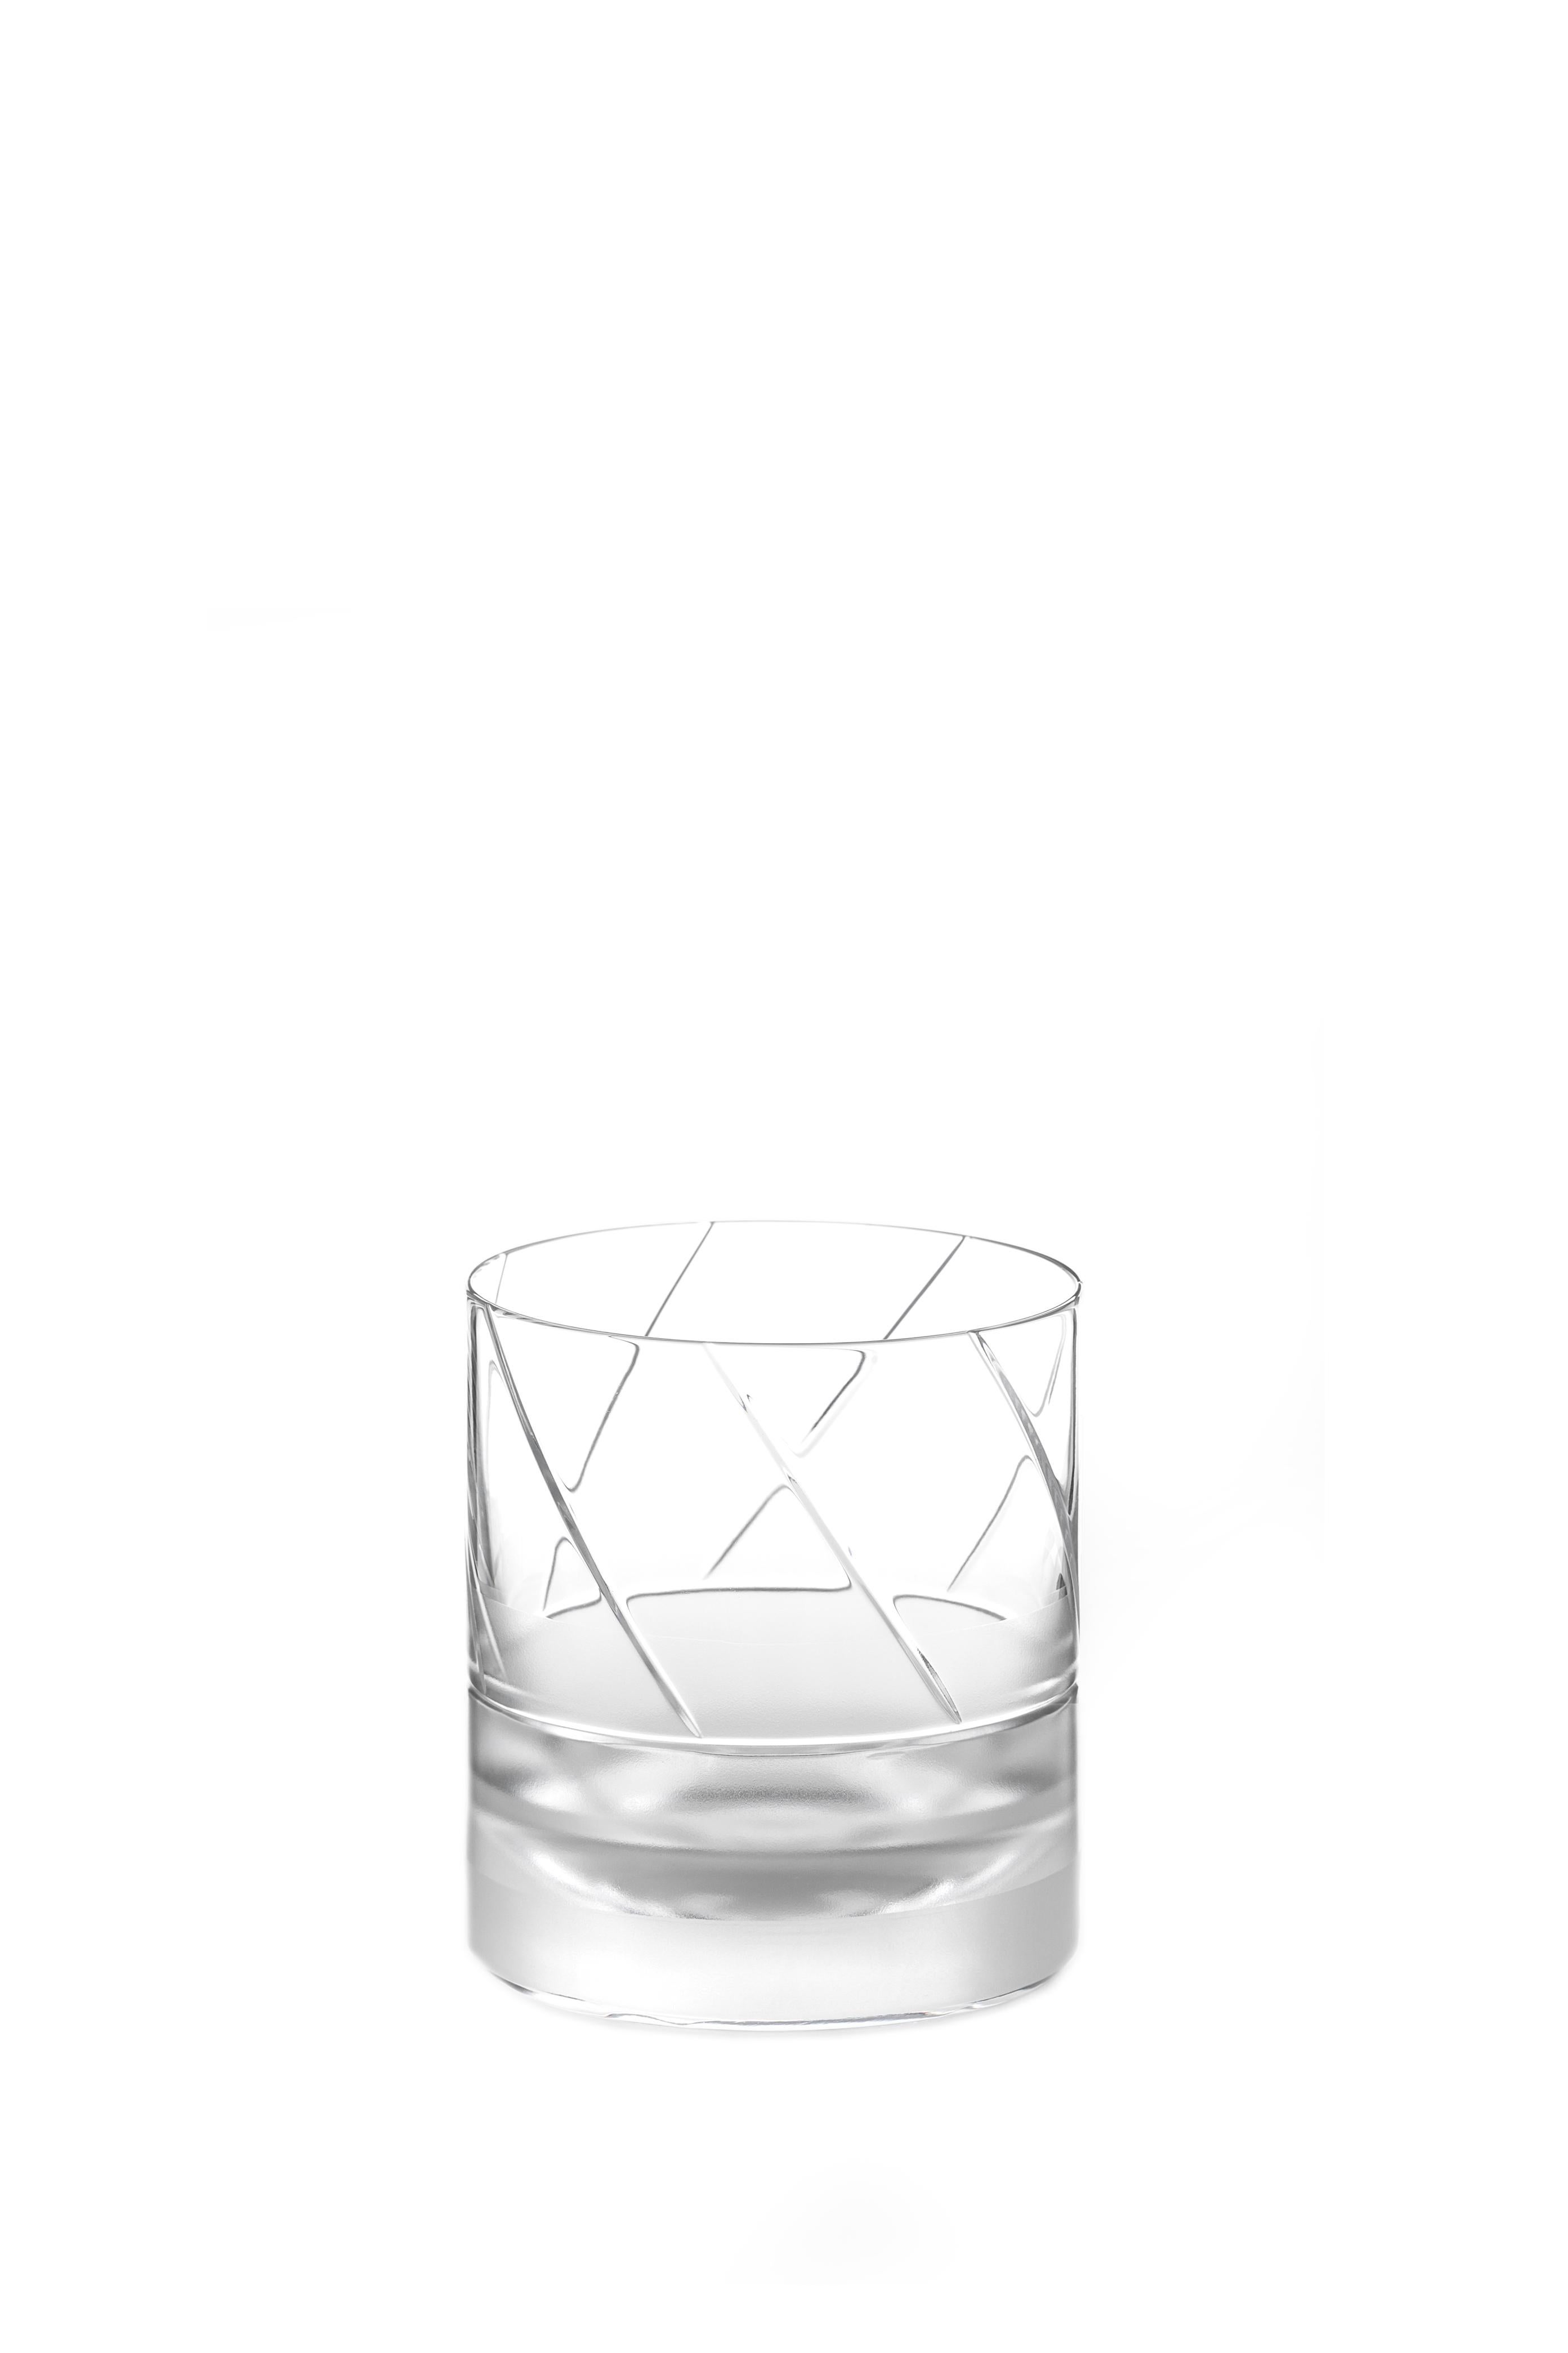 Hand-Crafted Scholten & Baijings Handmade Irish Crystal Whiskey Glass Elements CUT NO. VI For Sale